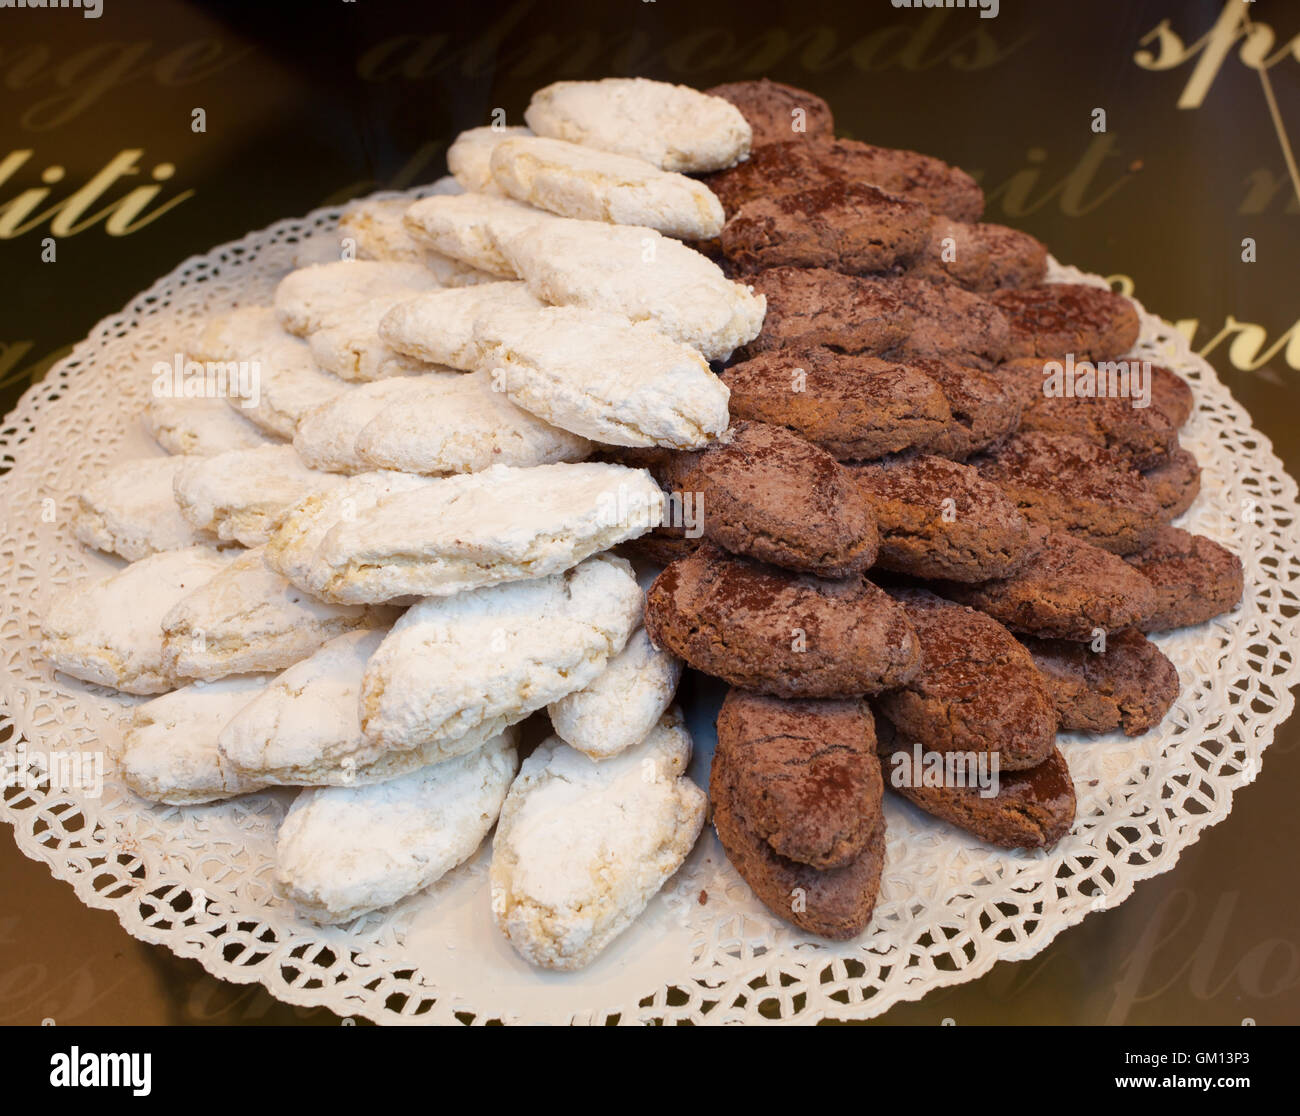 Ricciarelli typical biscuits of Tuscany, classic and chocolate.. Stock Photo